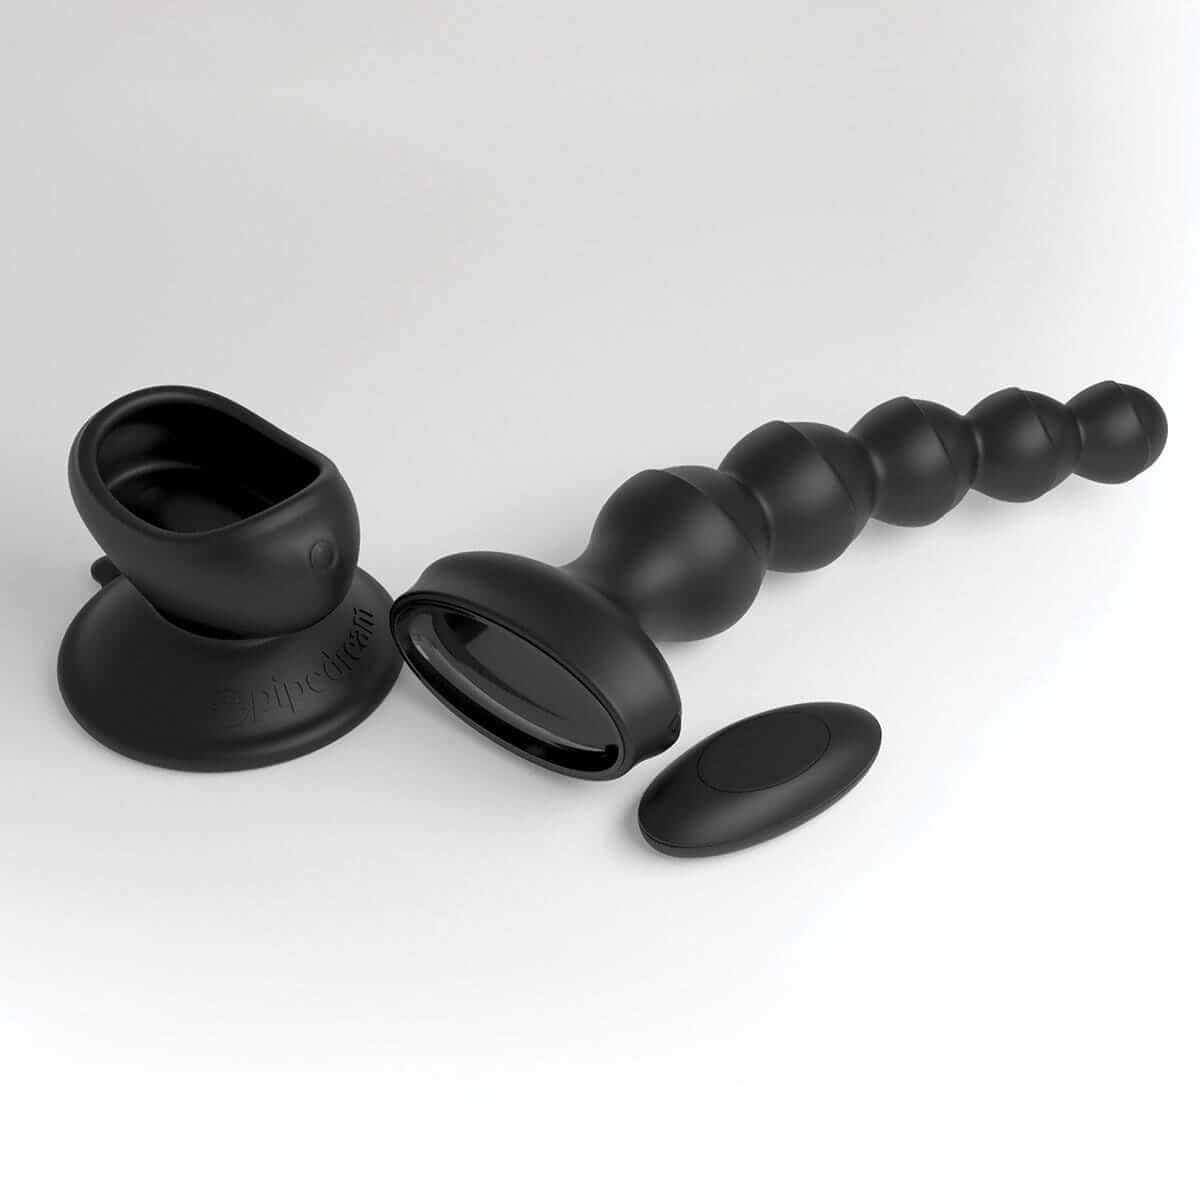 Wall Banger Beads - Black - Thorn & Feather Sex Toy Canada